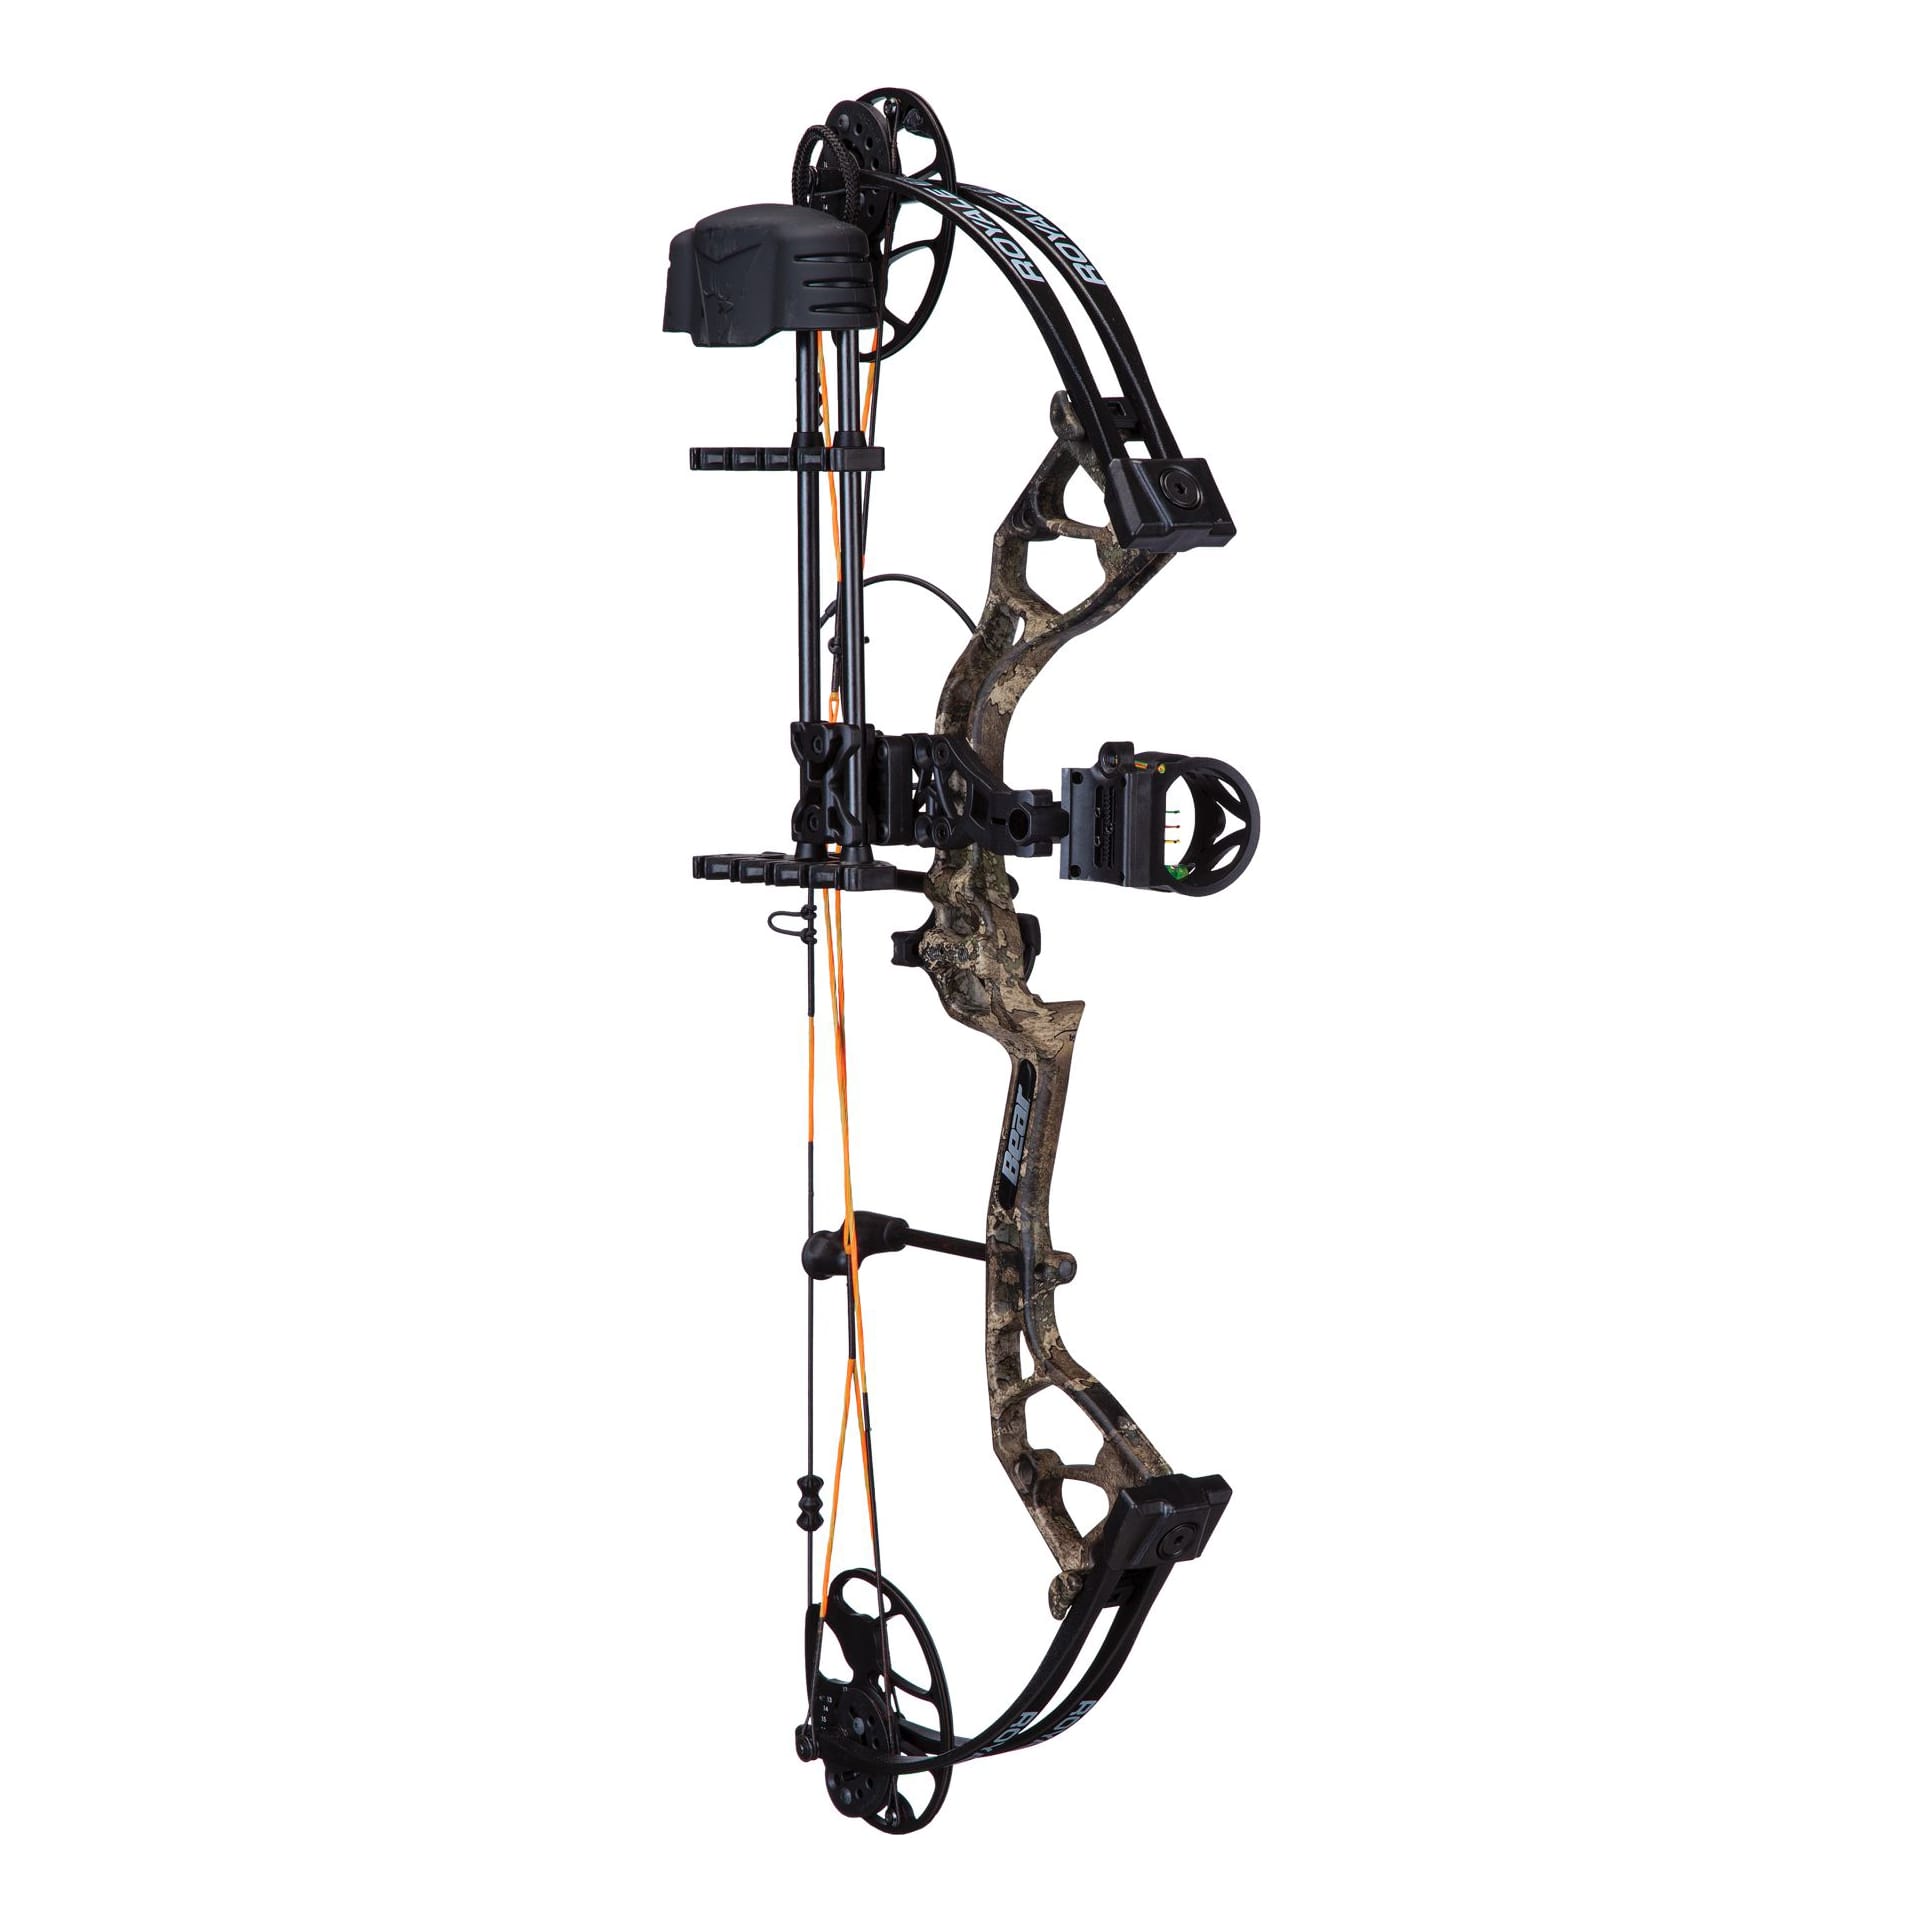 Bear® Archery Royale RTH Compound Bow Package - TrueTimber Strata - Side View,Bear® Archery Royale RTH Compound Bow Package - TrueTimber Strata - Side View